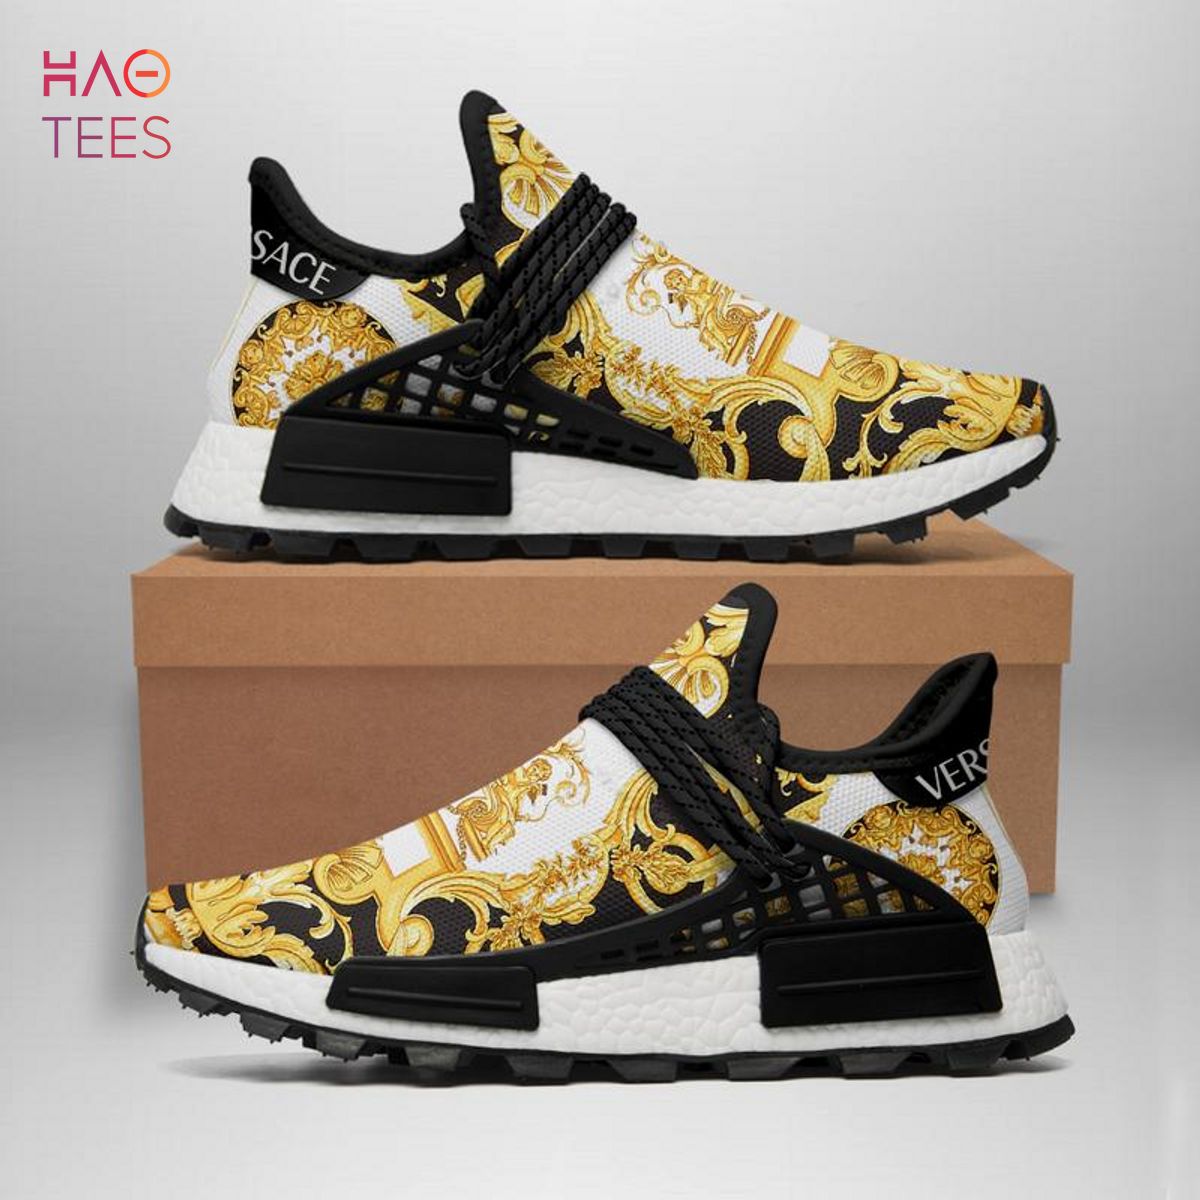 BEST Gucci Black Stripe NMD Human Race Shoes Sneakers Limited Edition